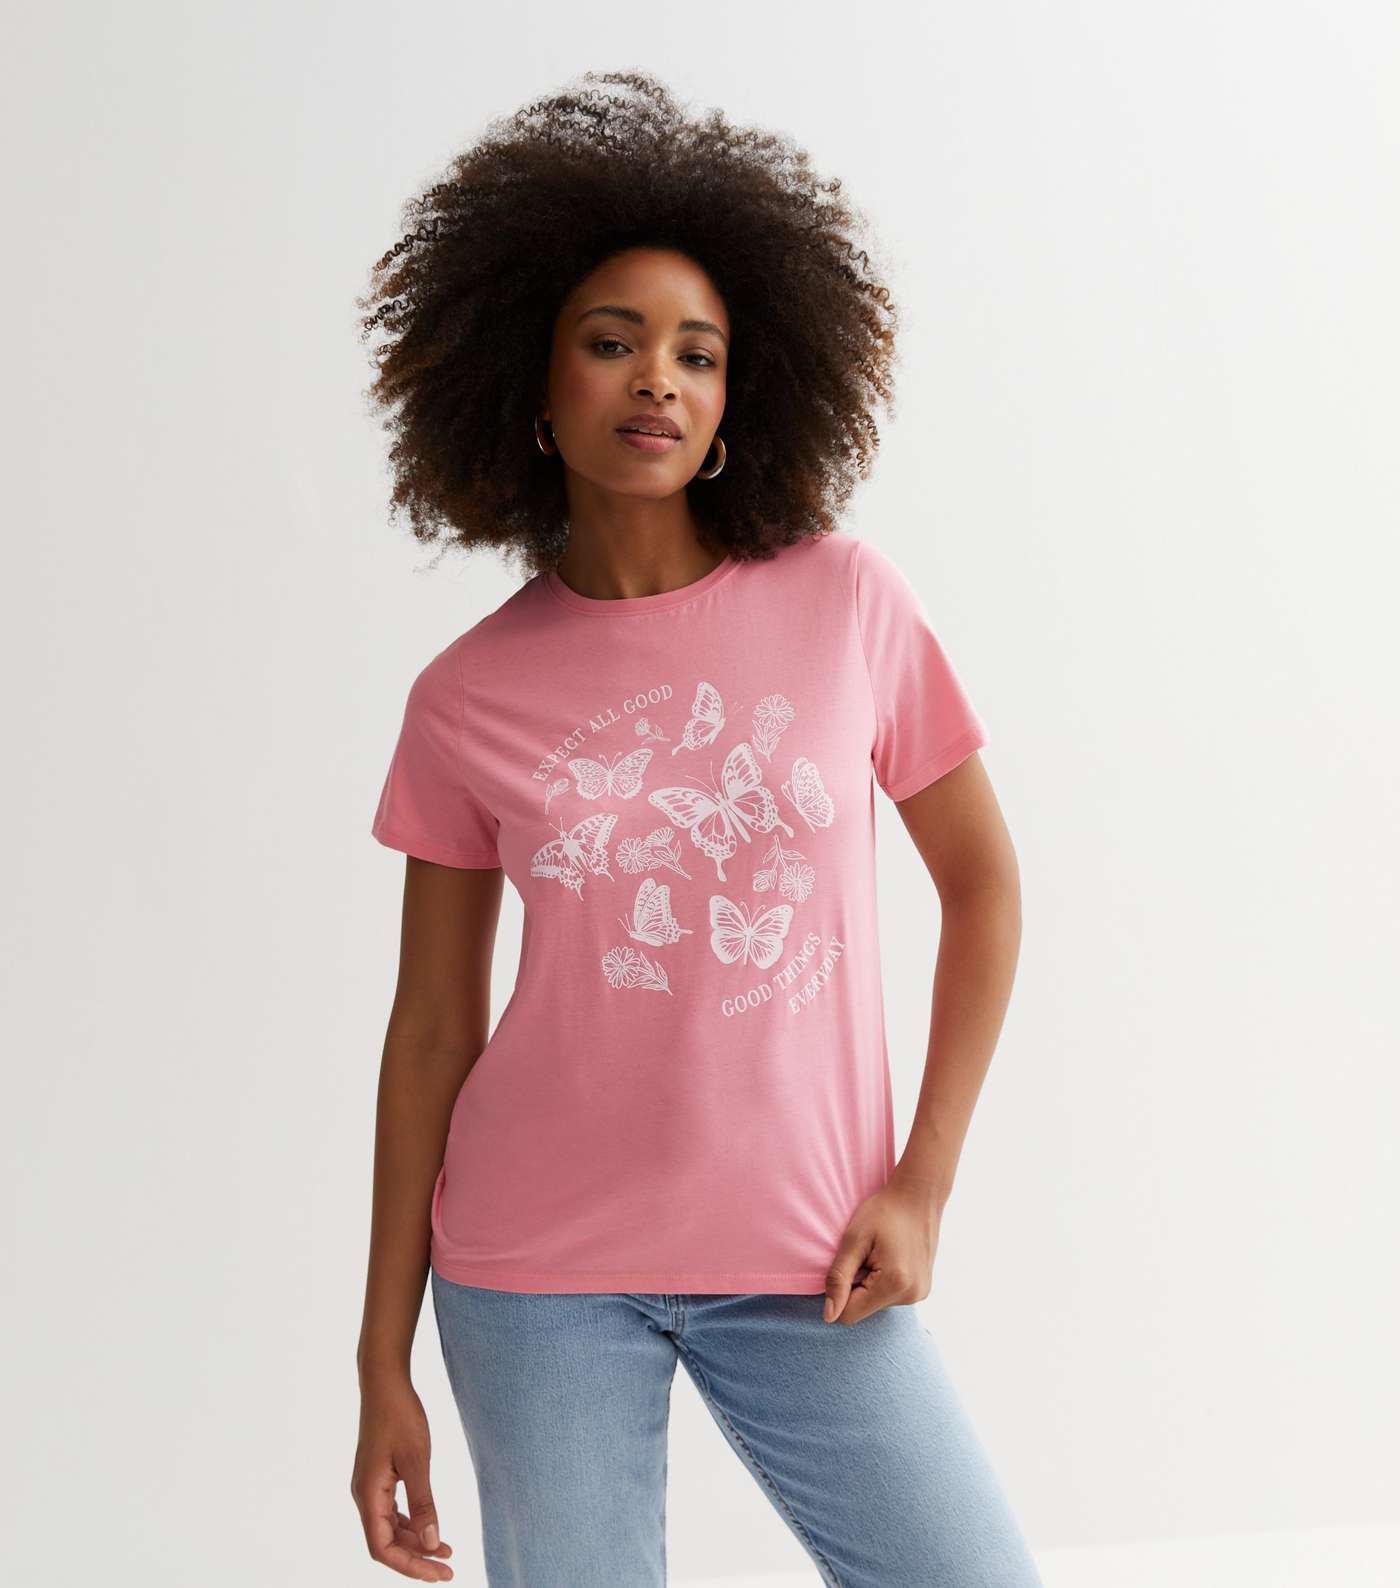 Pale Pink Expect Good Things Butterfly Logo T-Shirt Image 2